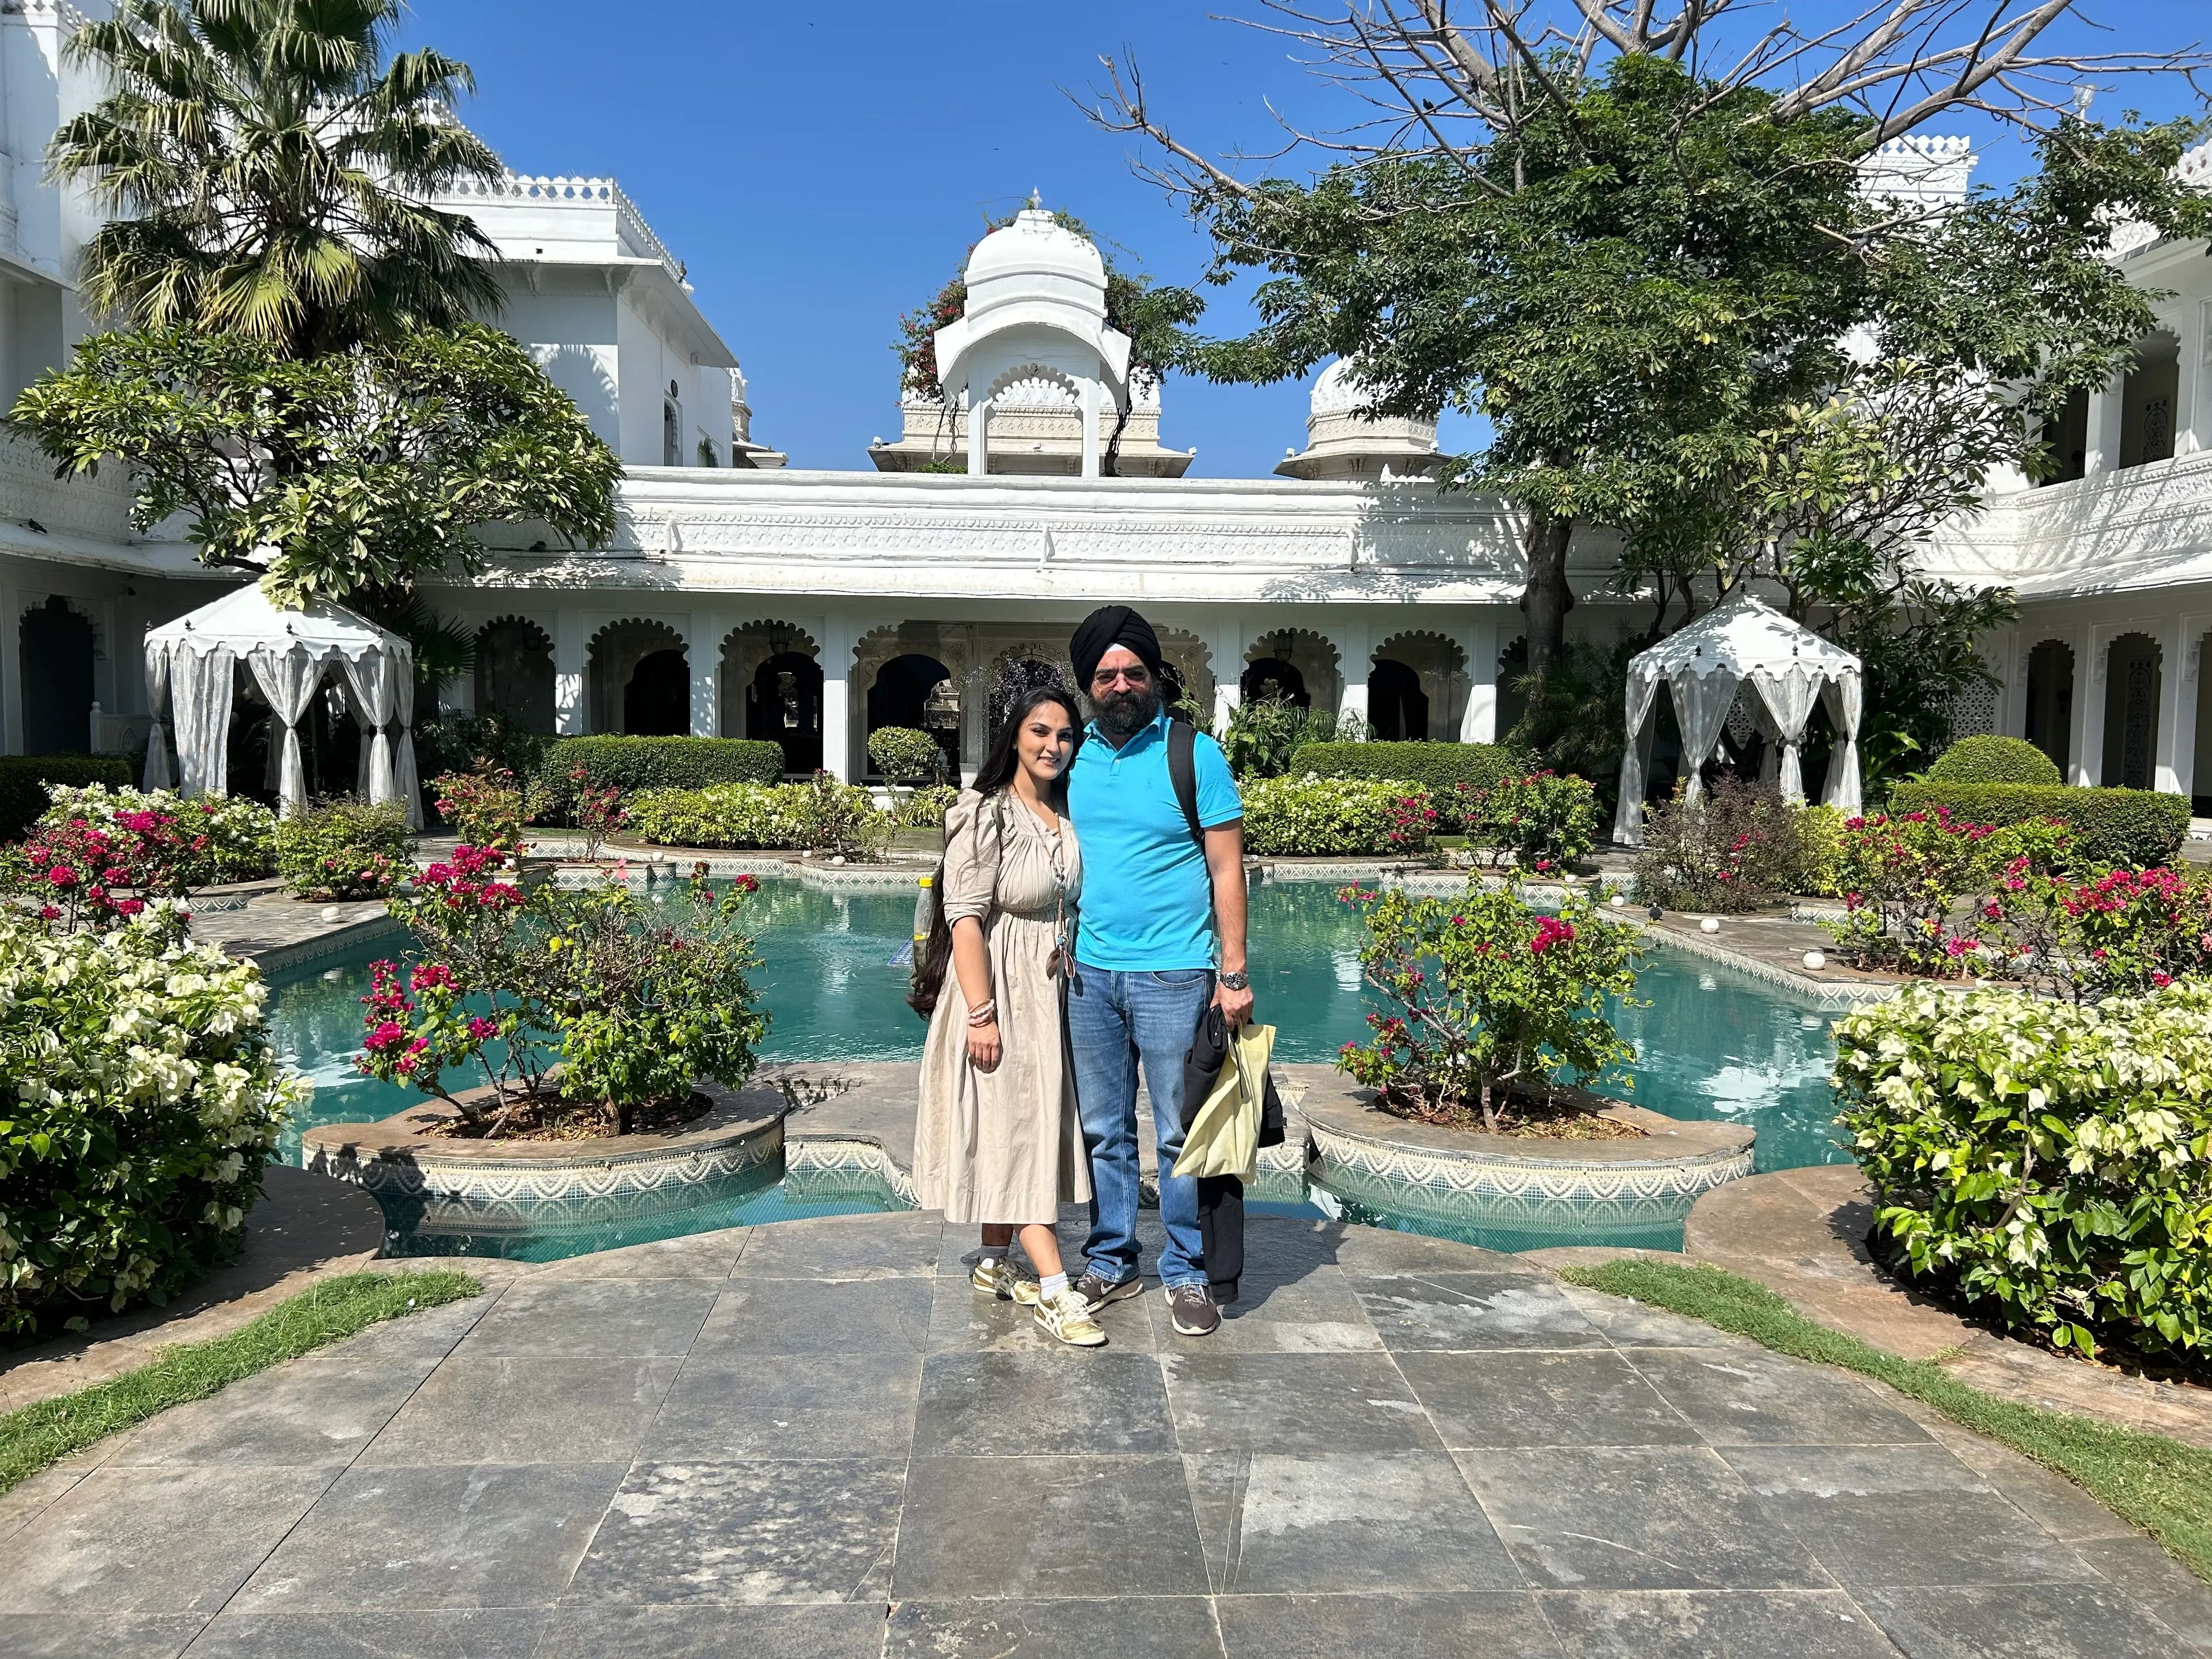 Noor and her husband pose in the central courtyard, which has a man-made pond and a garden.